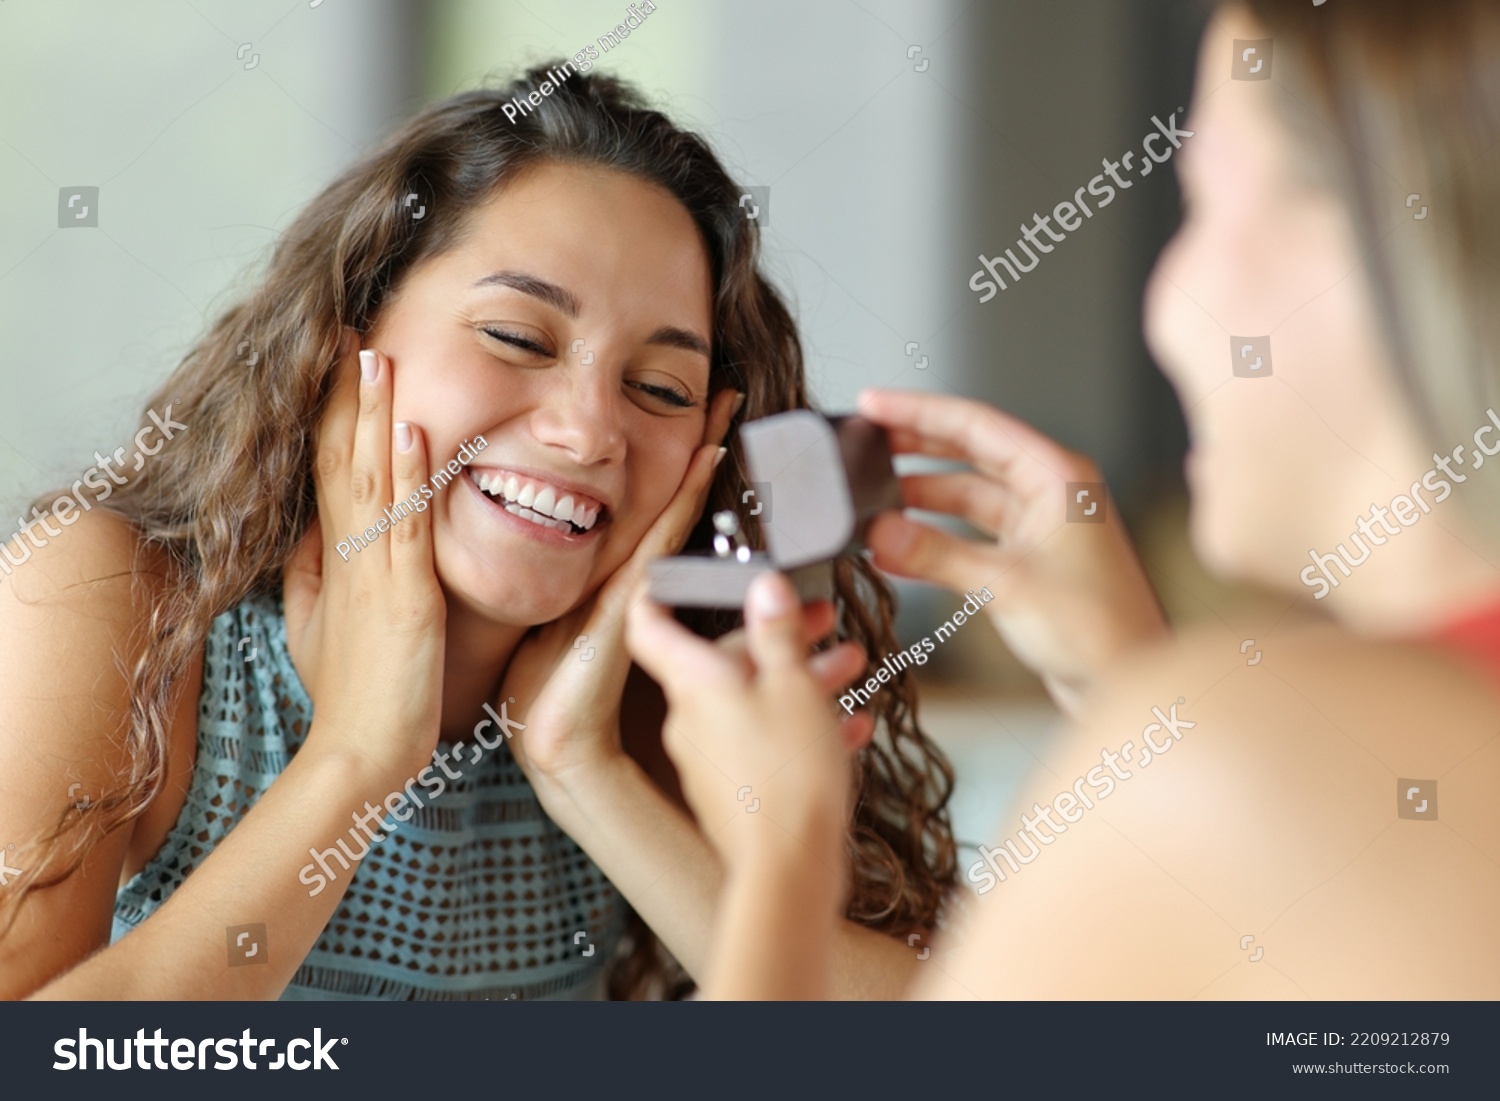 Happy lesbian woman in a marriage proposal accepting engagement #2209212879